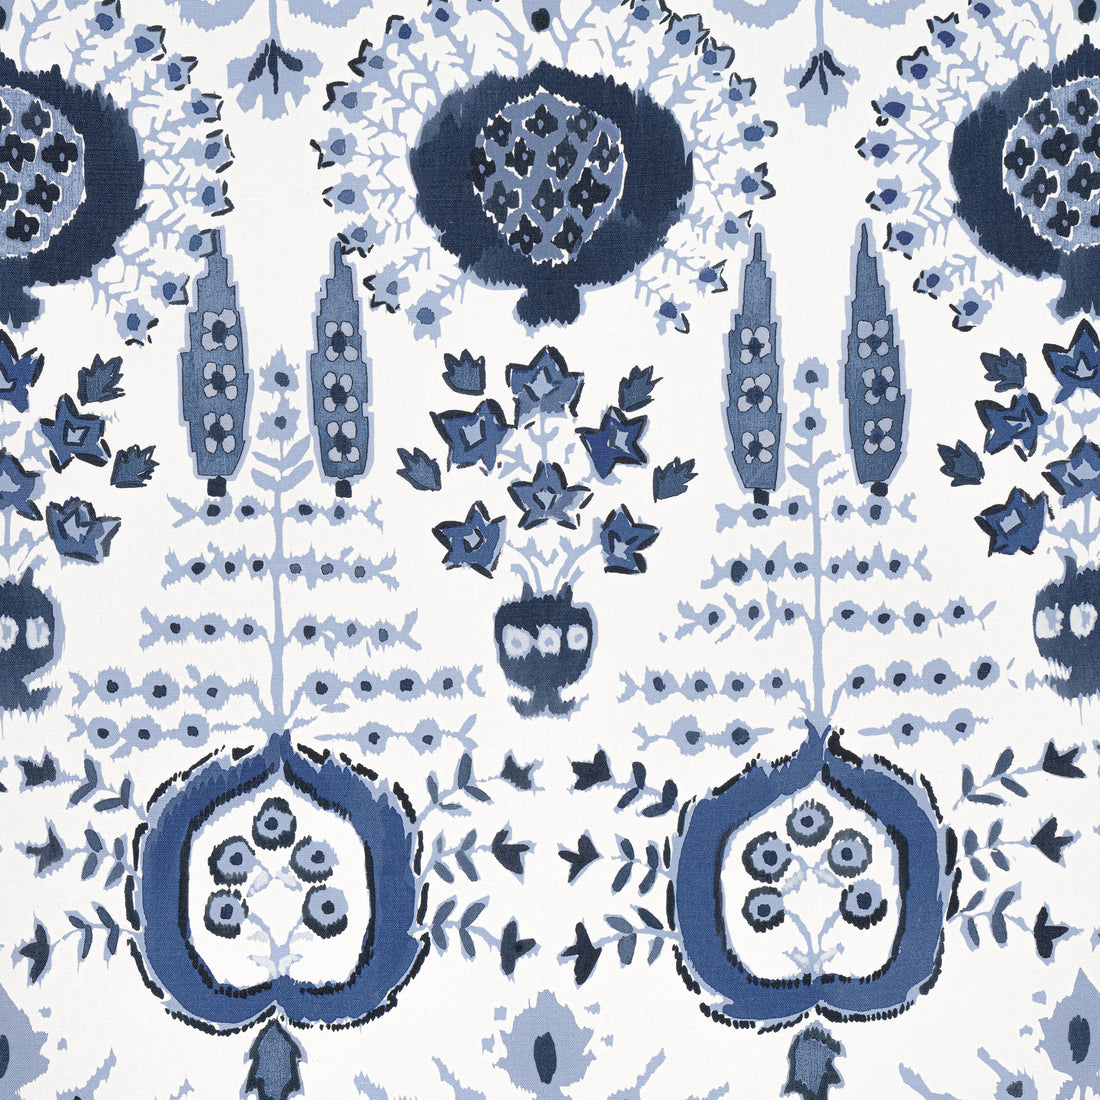 Mendoza Suzani fabric in blue and white color - pattern number F916239 - by Thibaut in the Kismet collection